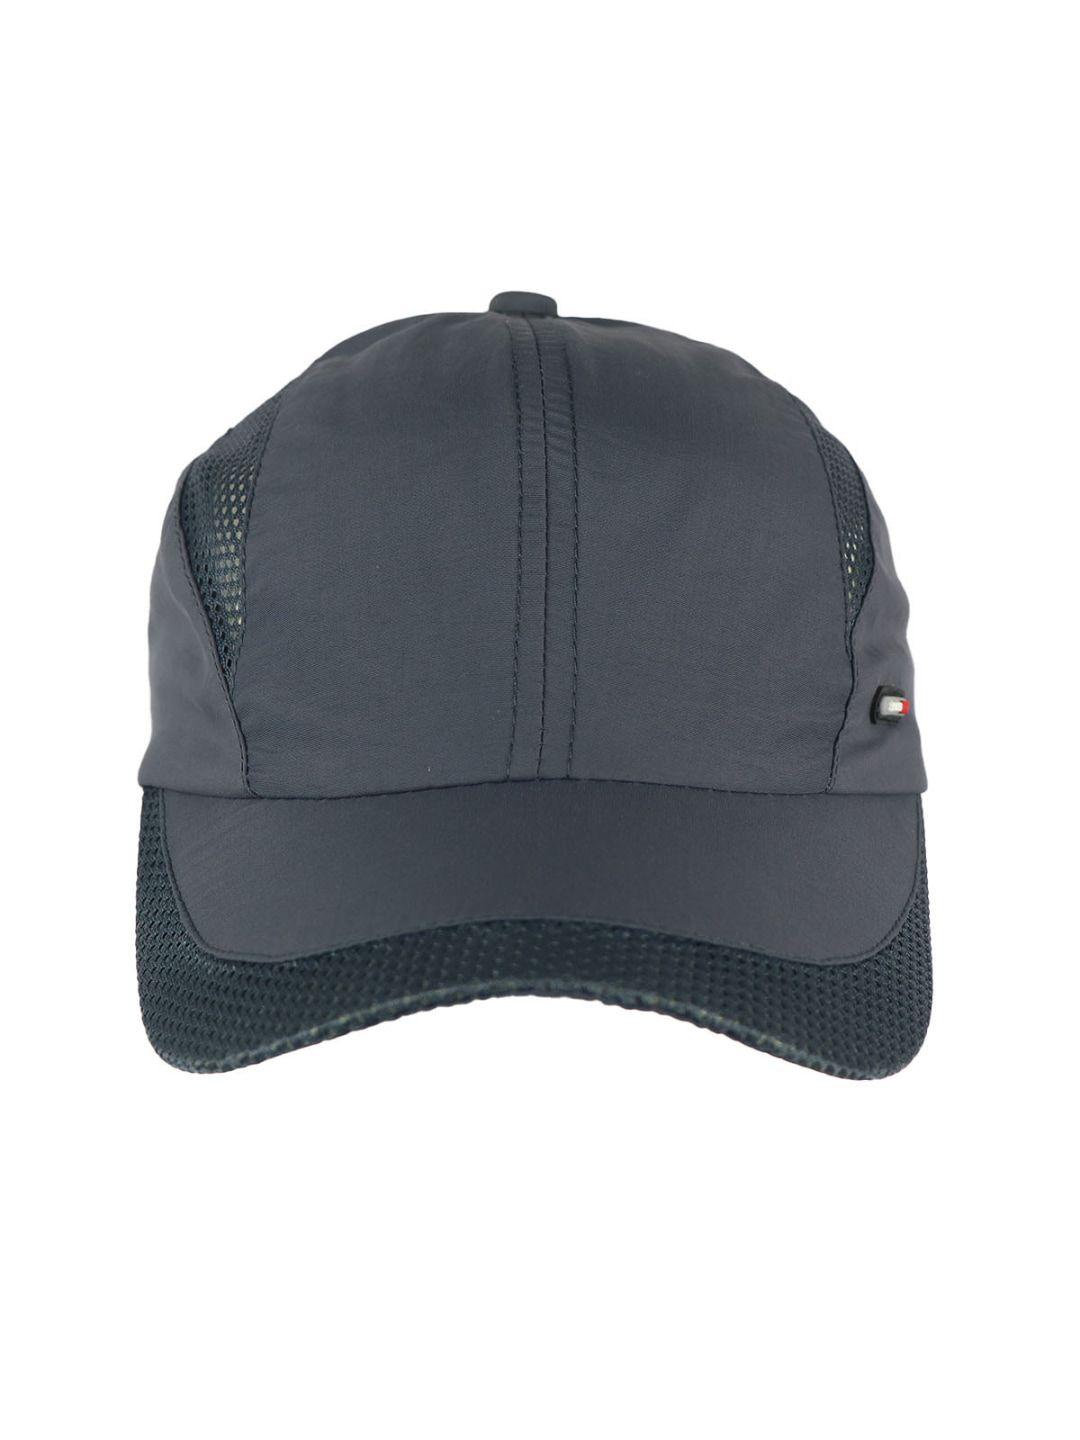 isweven unisex grey solid baseball cap